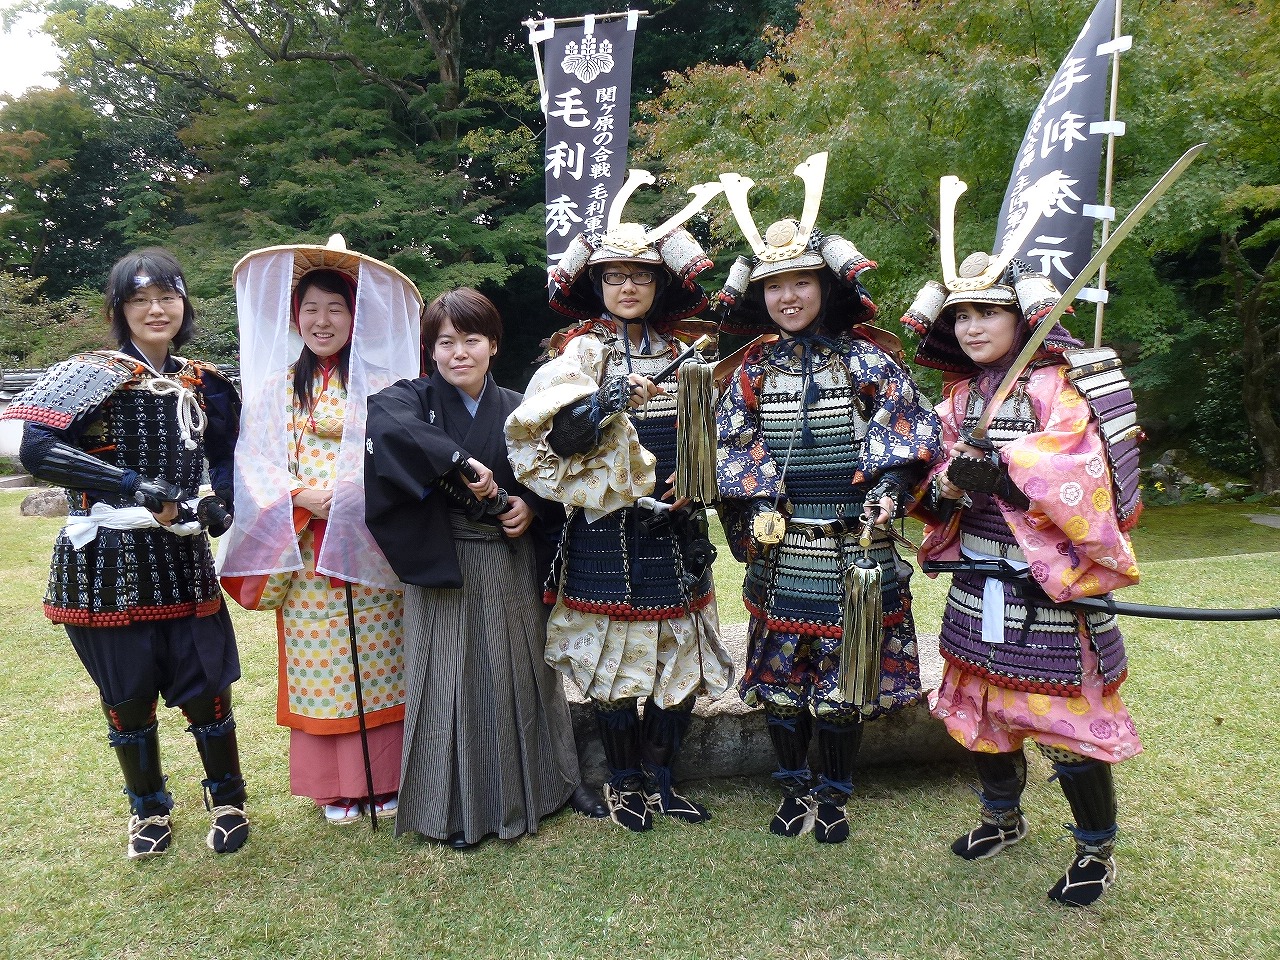 Samurai Experience at the Site of the Duel Between the Two Most Famous Samurais in Japan